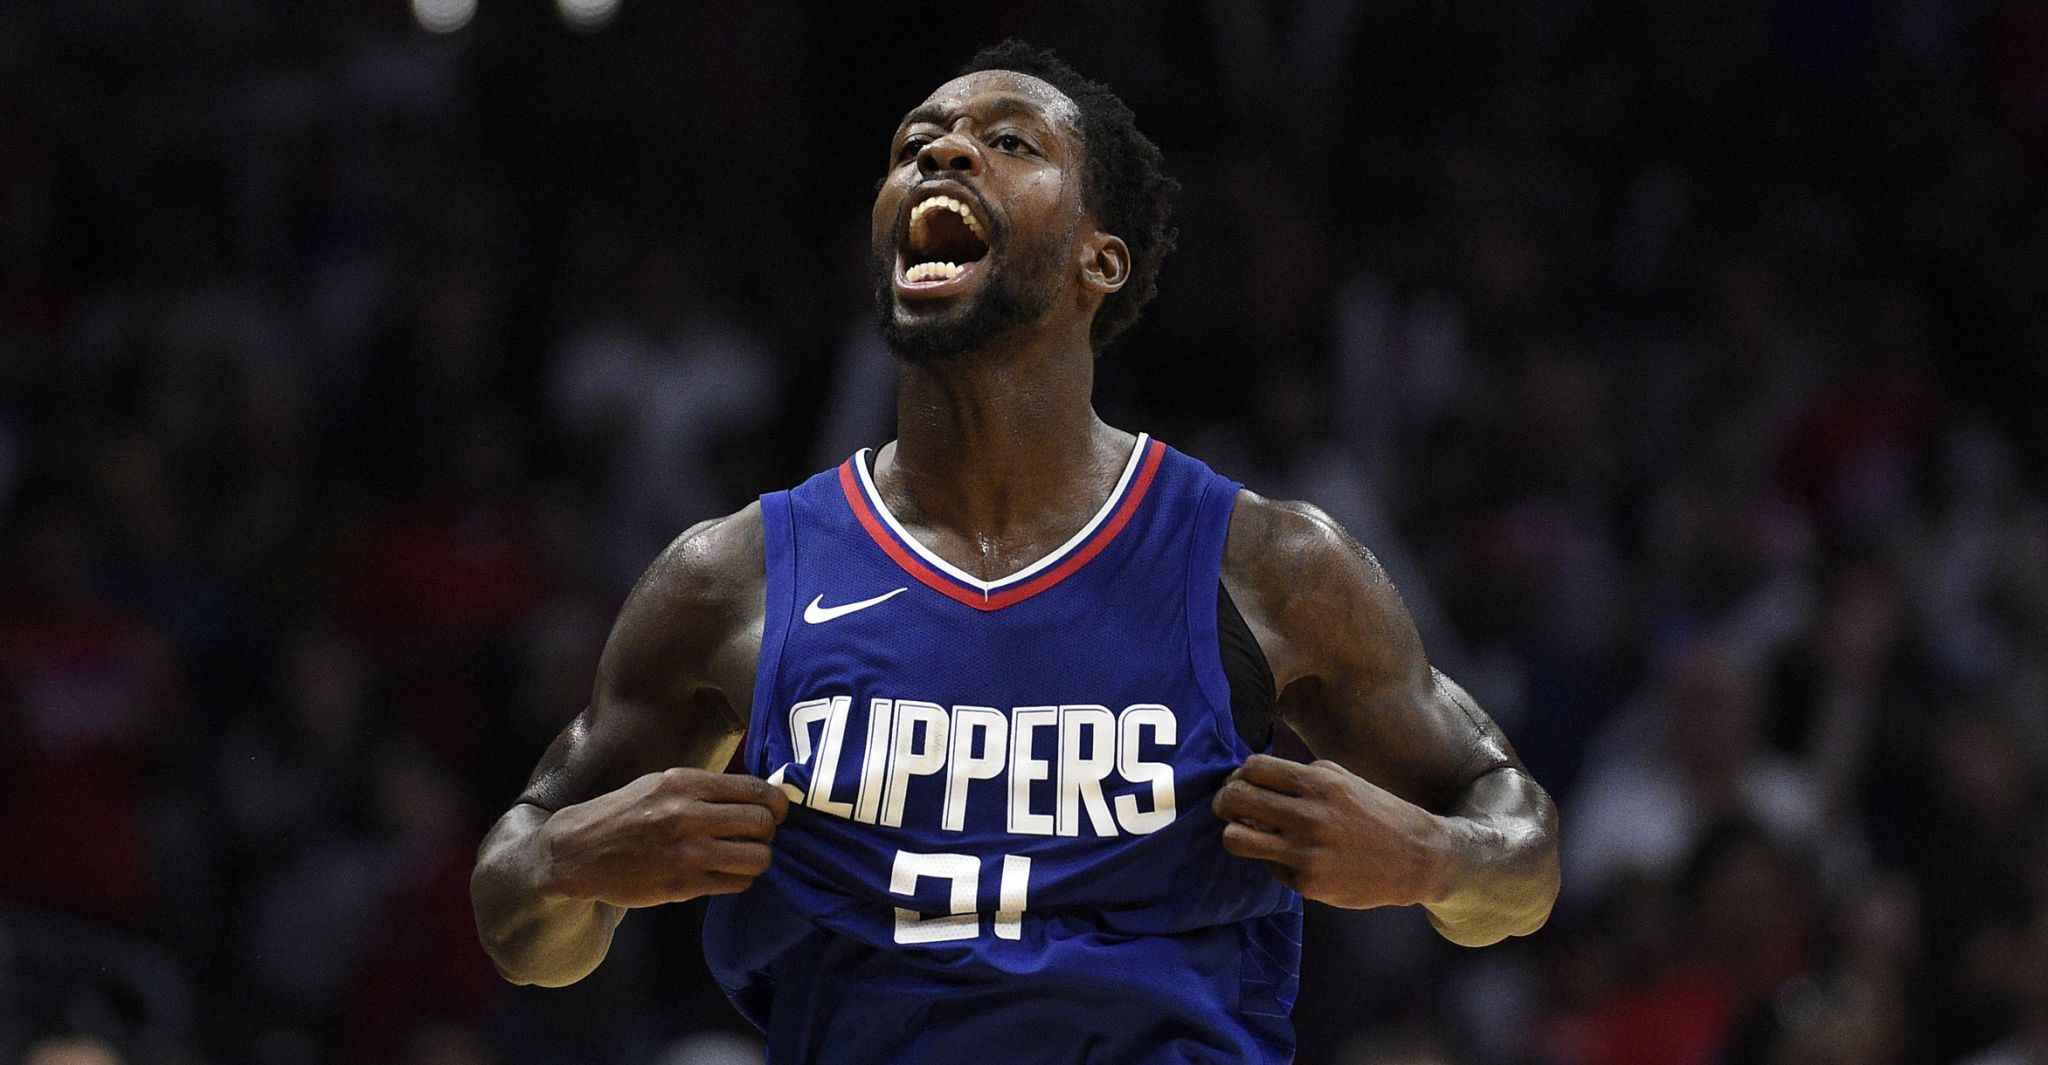 Pictures Of Patrick Beverley Wallpapers